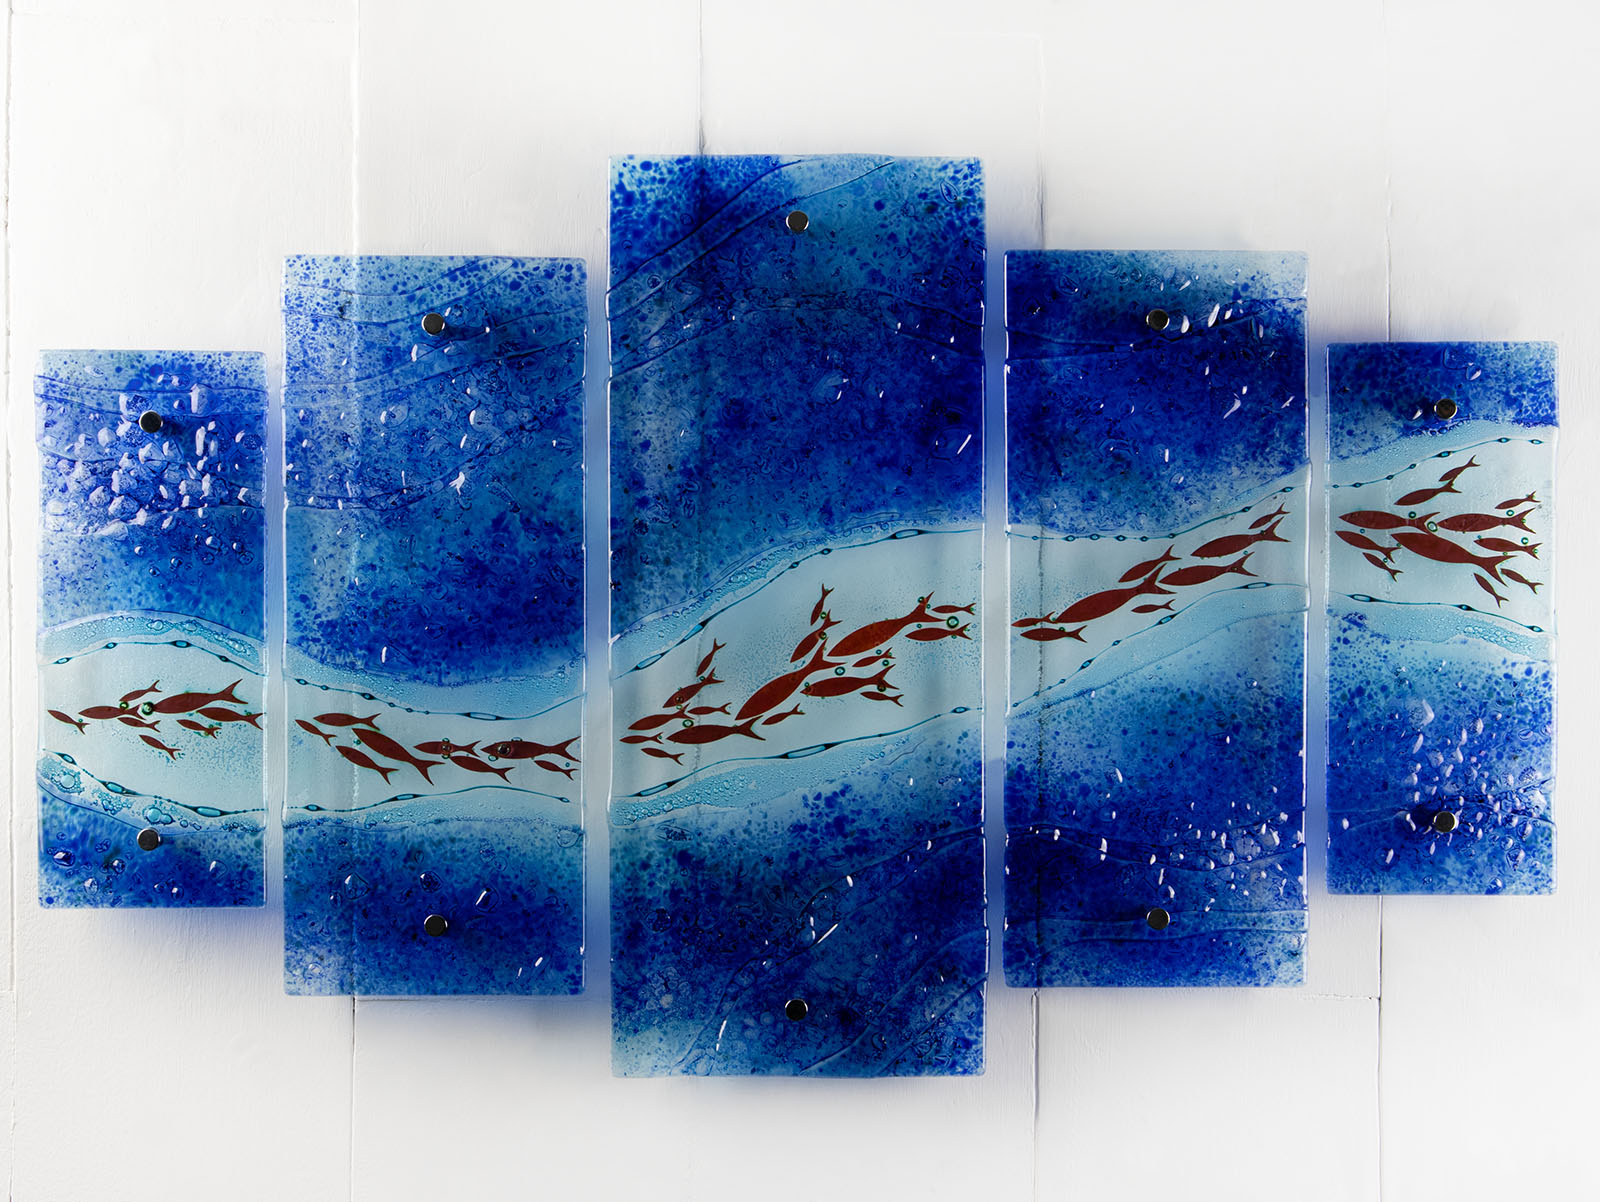 Artisan Crystal Currents Quintych